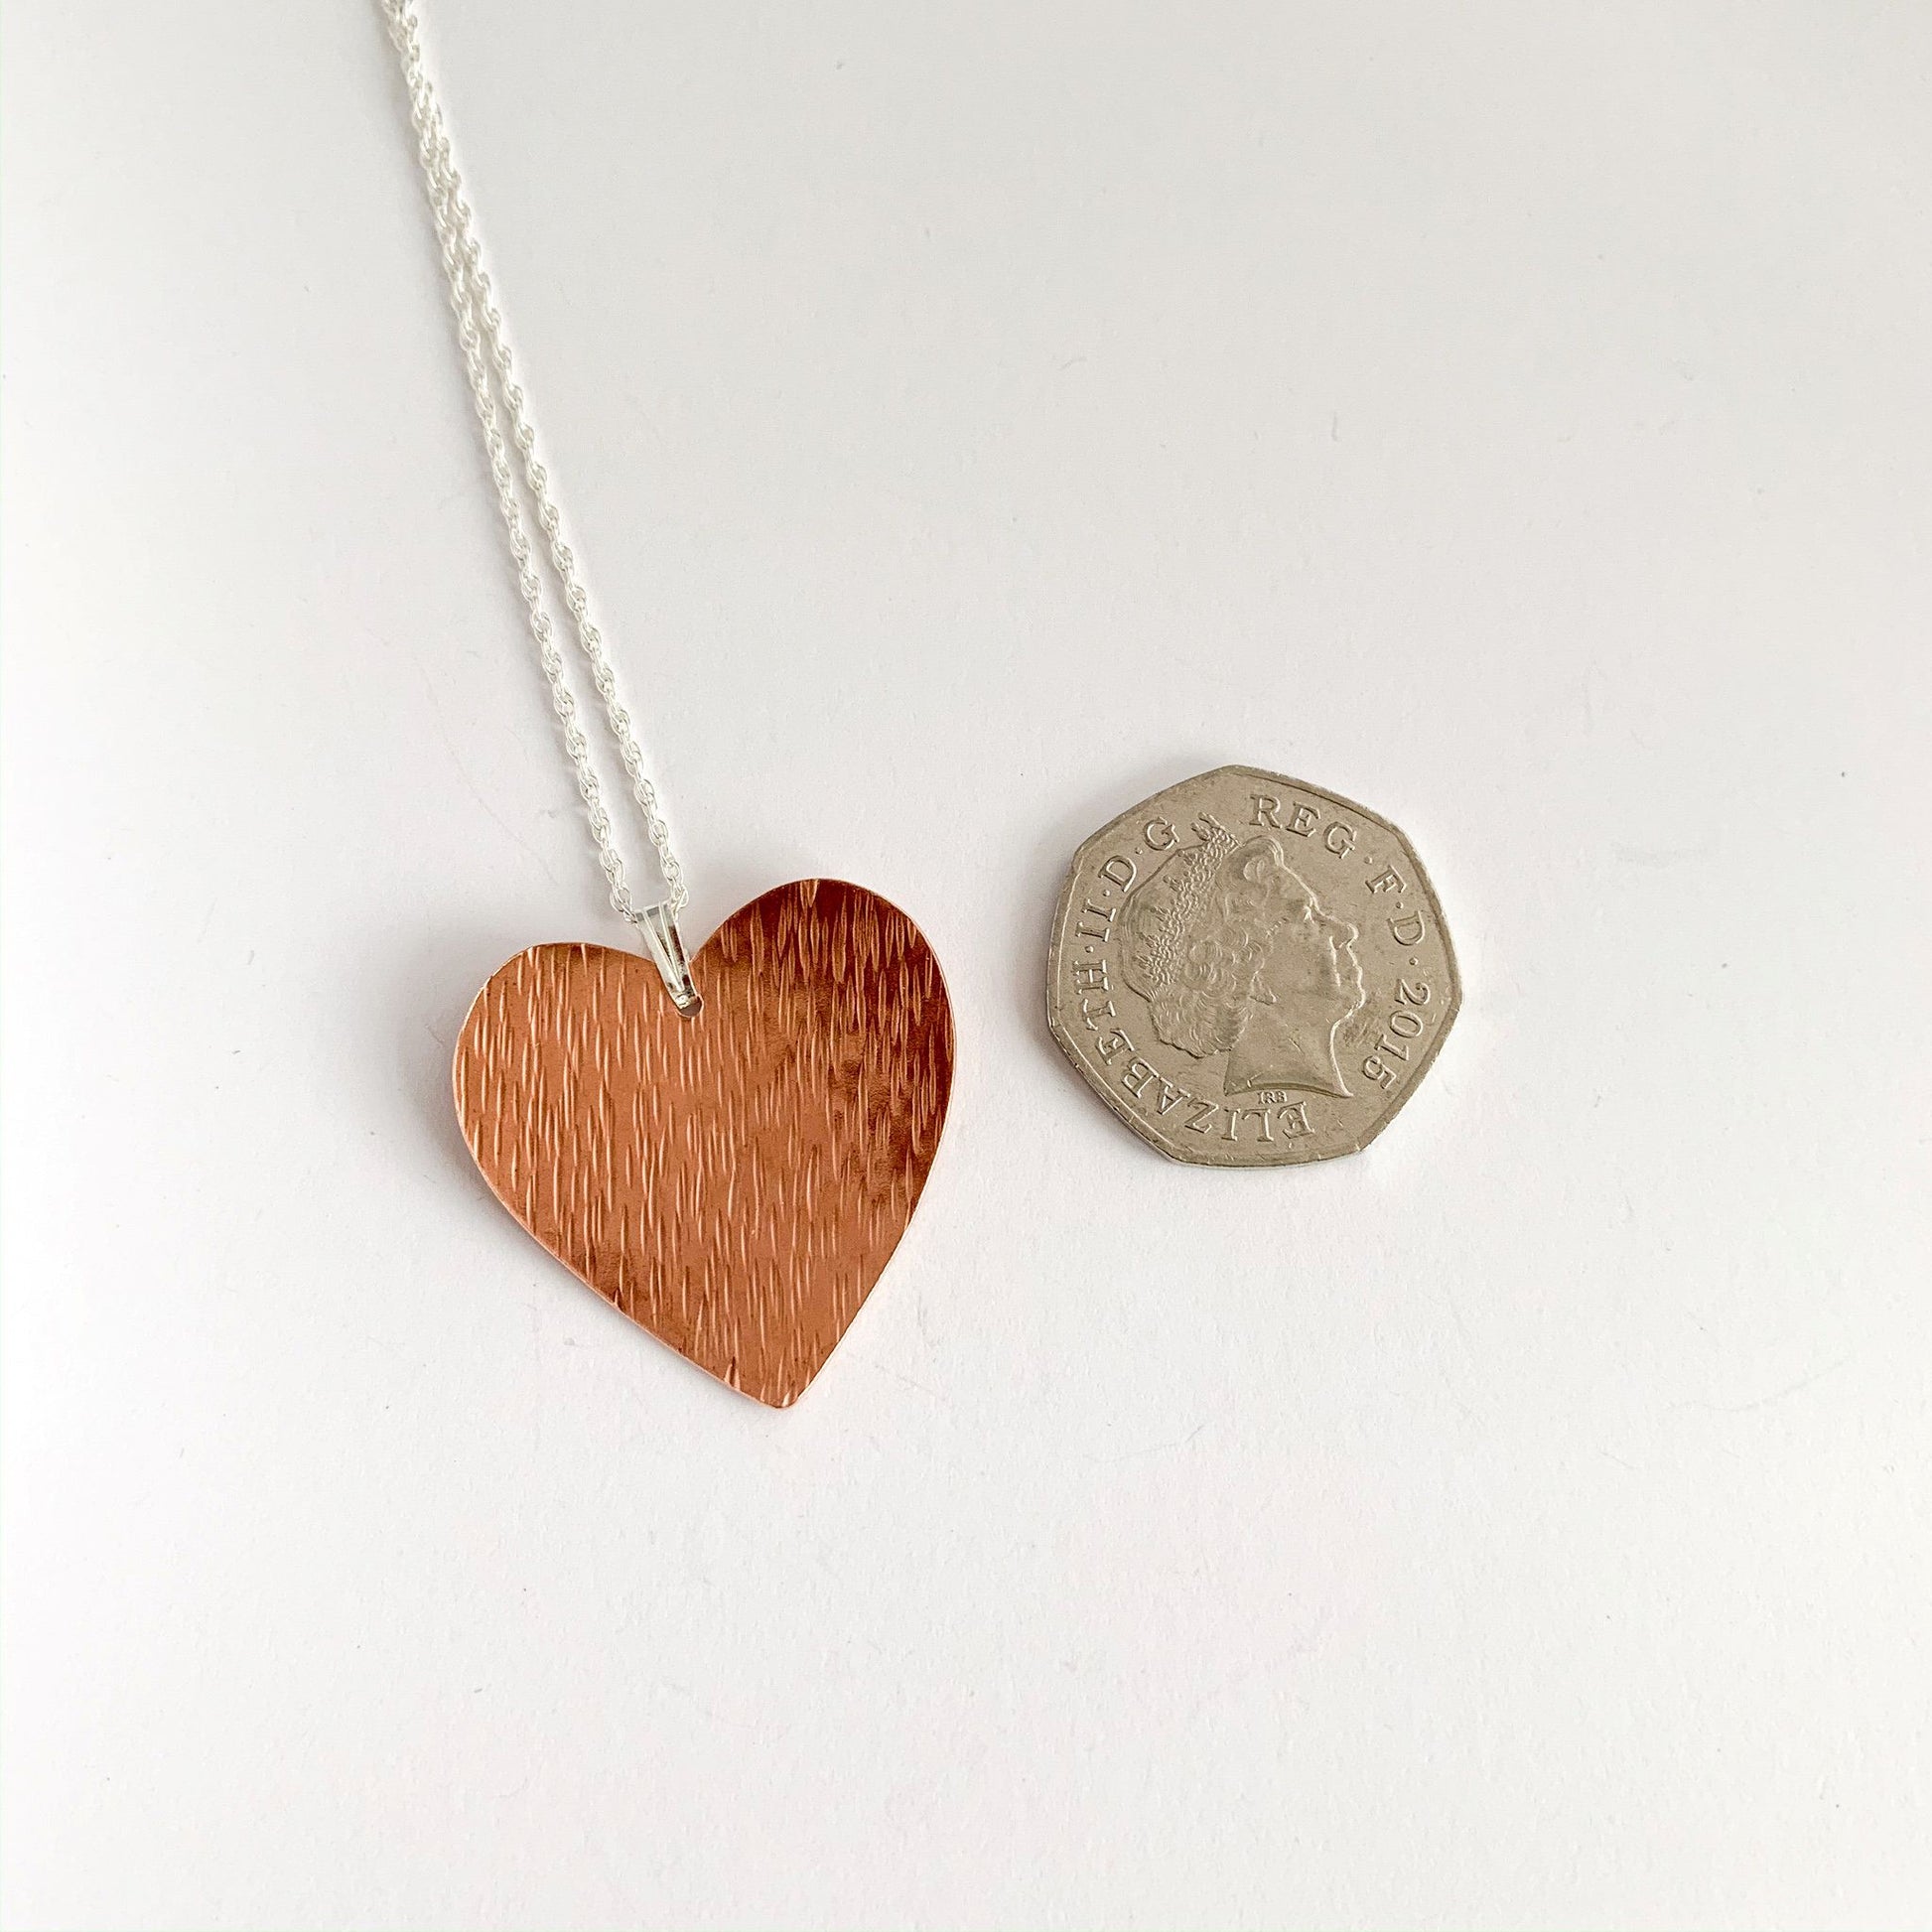 Rustic Hammered Copper Heart Necklace